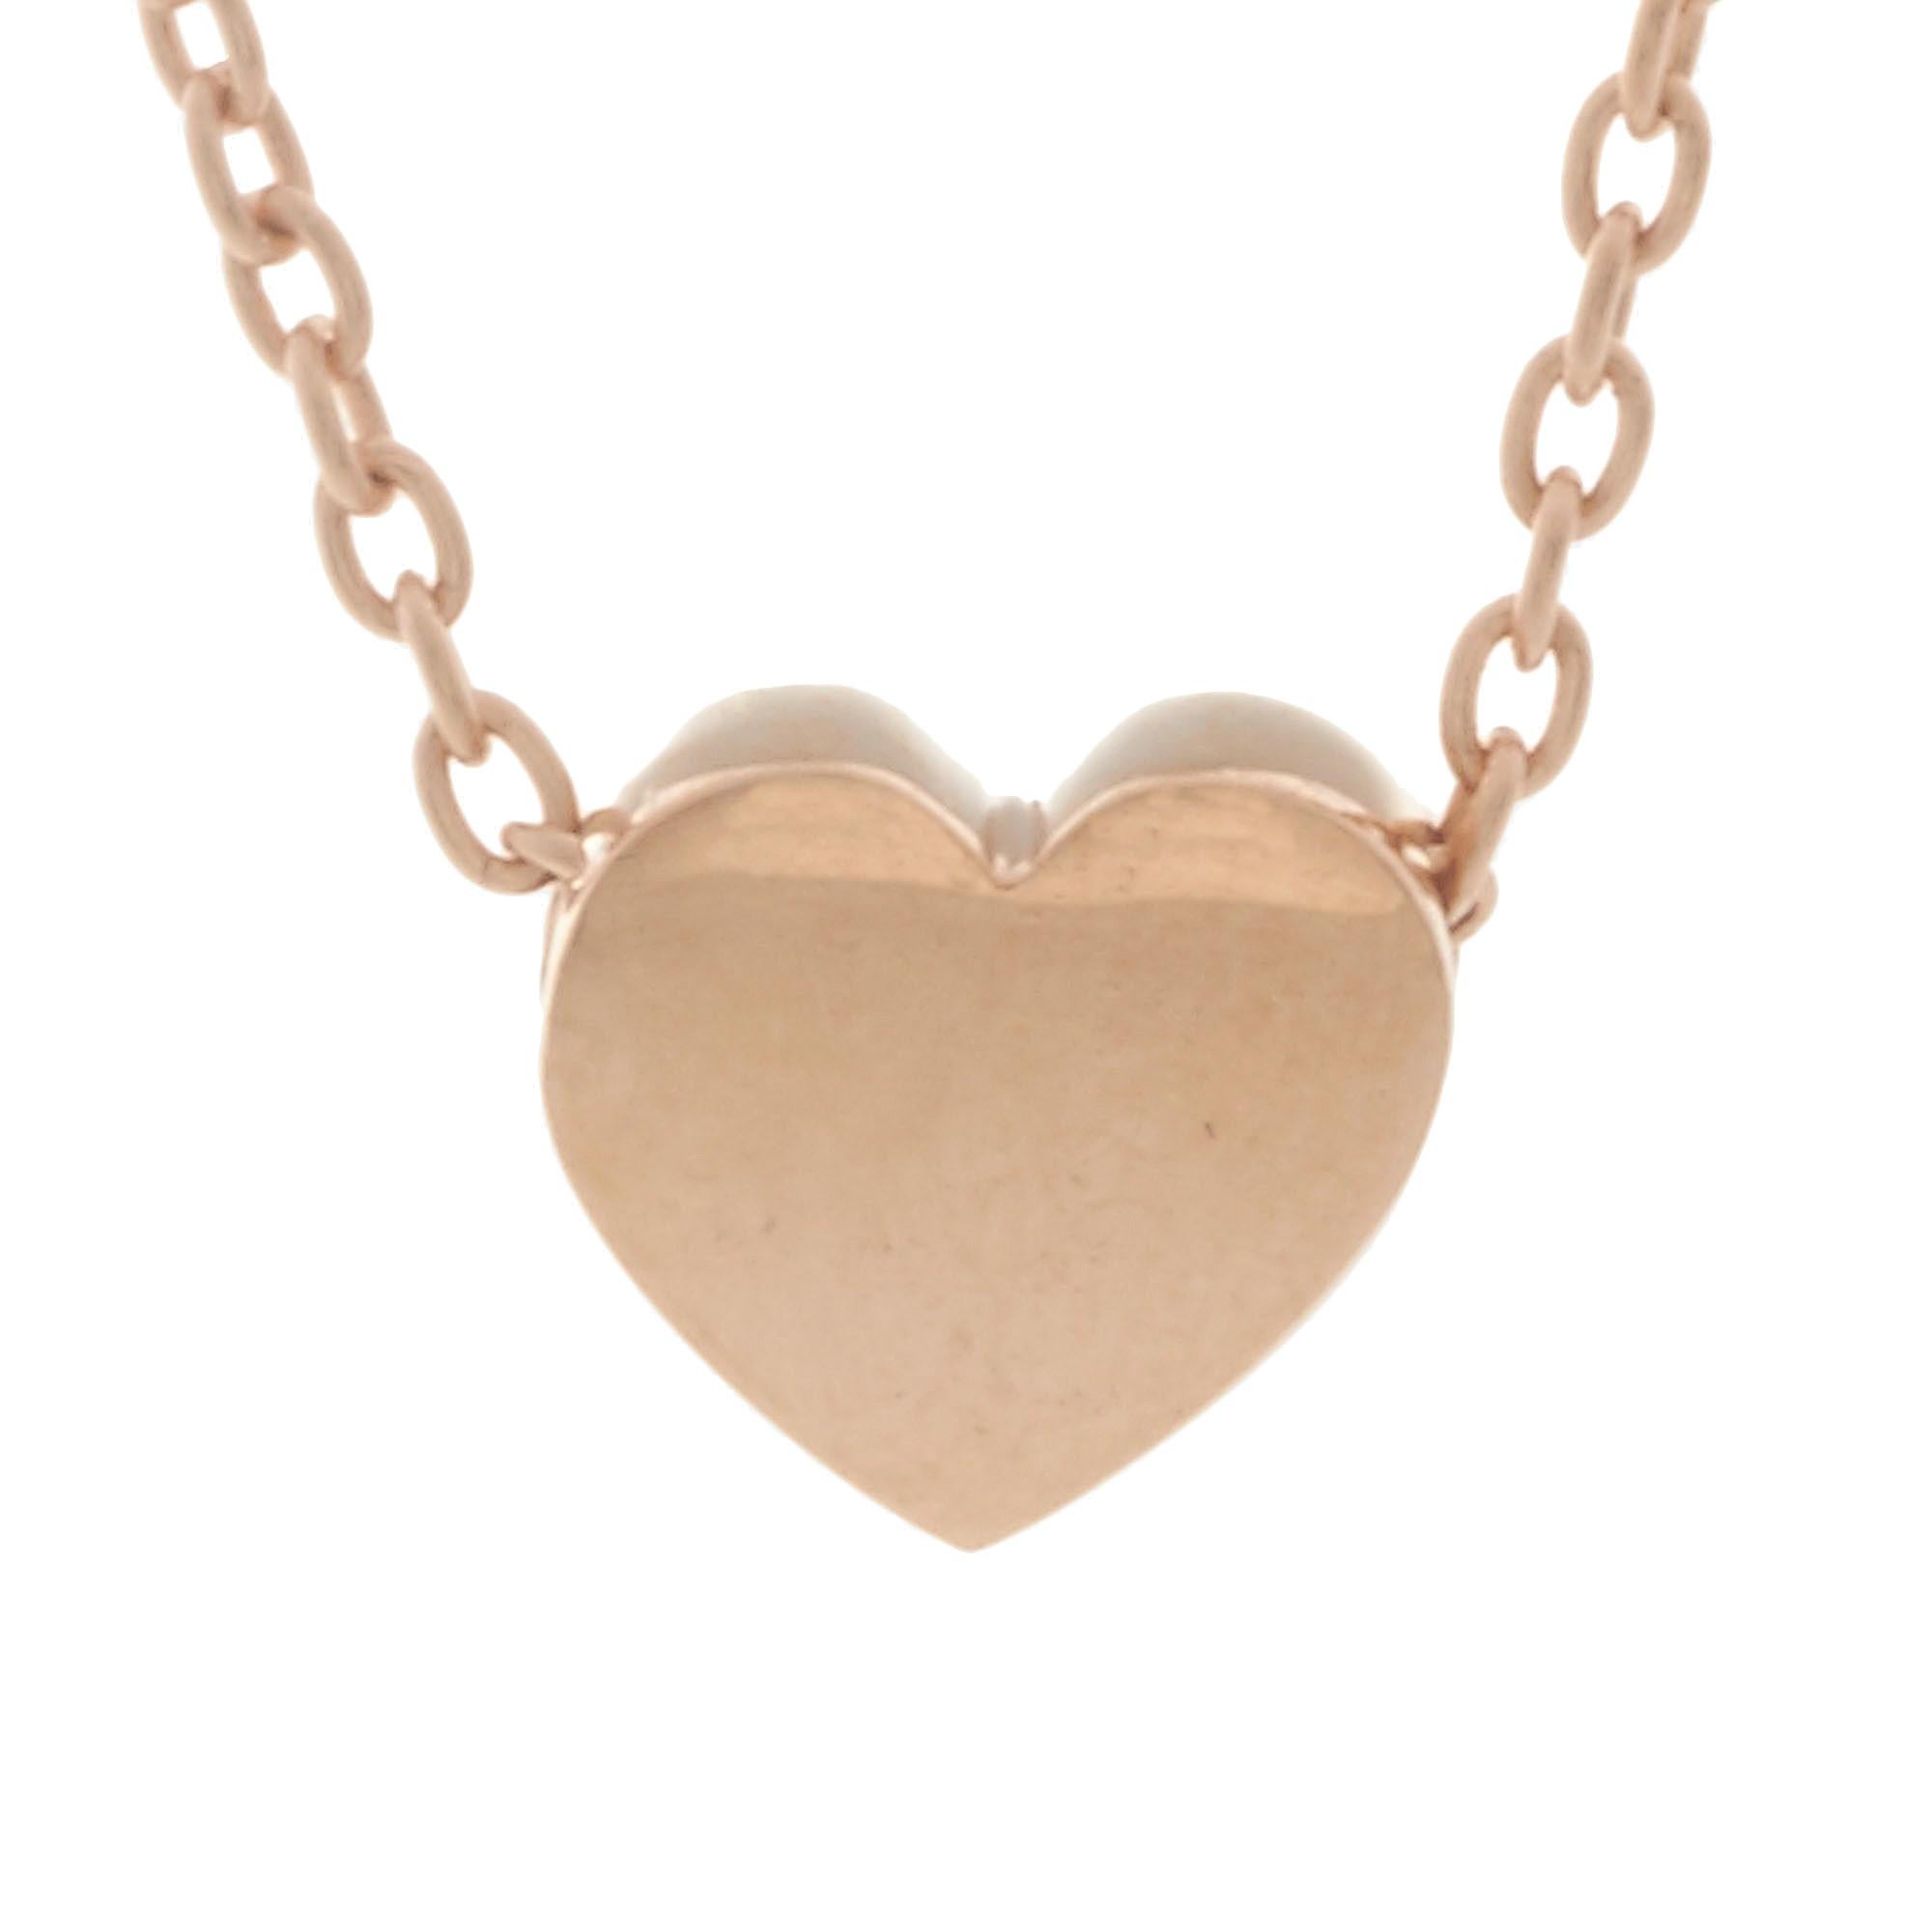 DESCRIPTION

This simply beautiful heart set of pendant and earrings, that is crafted out of a trendy pink gold, creating a sweet polished heart.

A trendy, yet elegant combination, that would make the perfect gift for someone